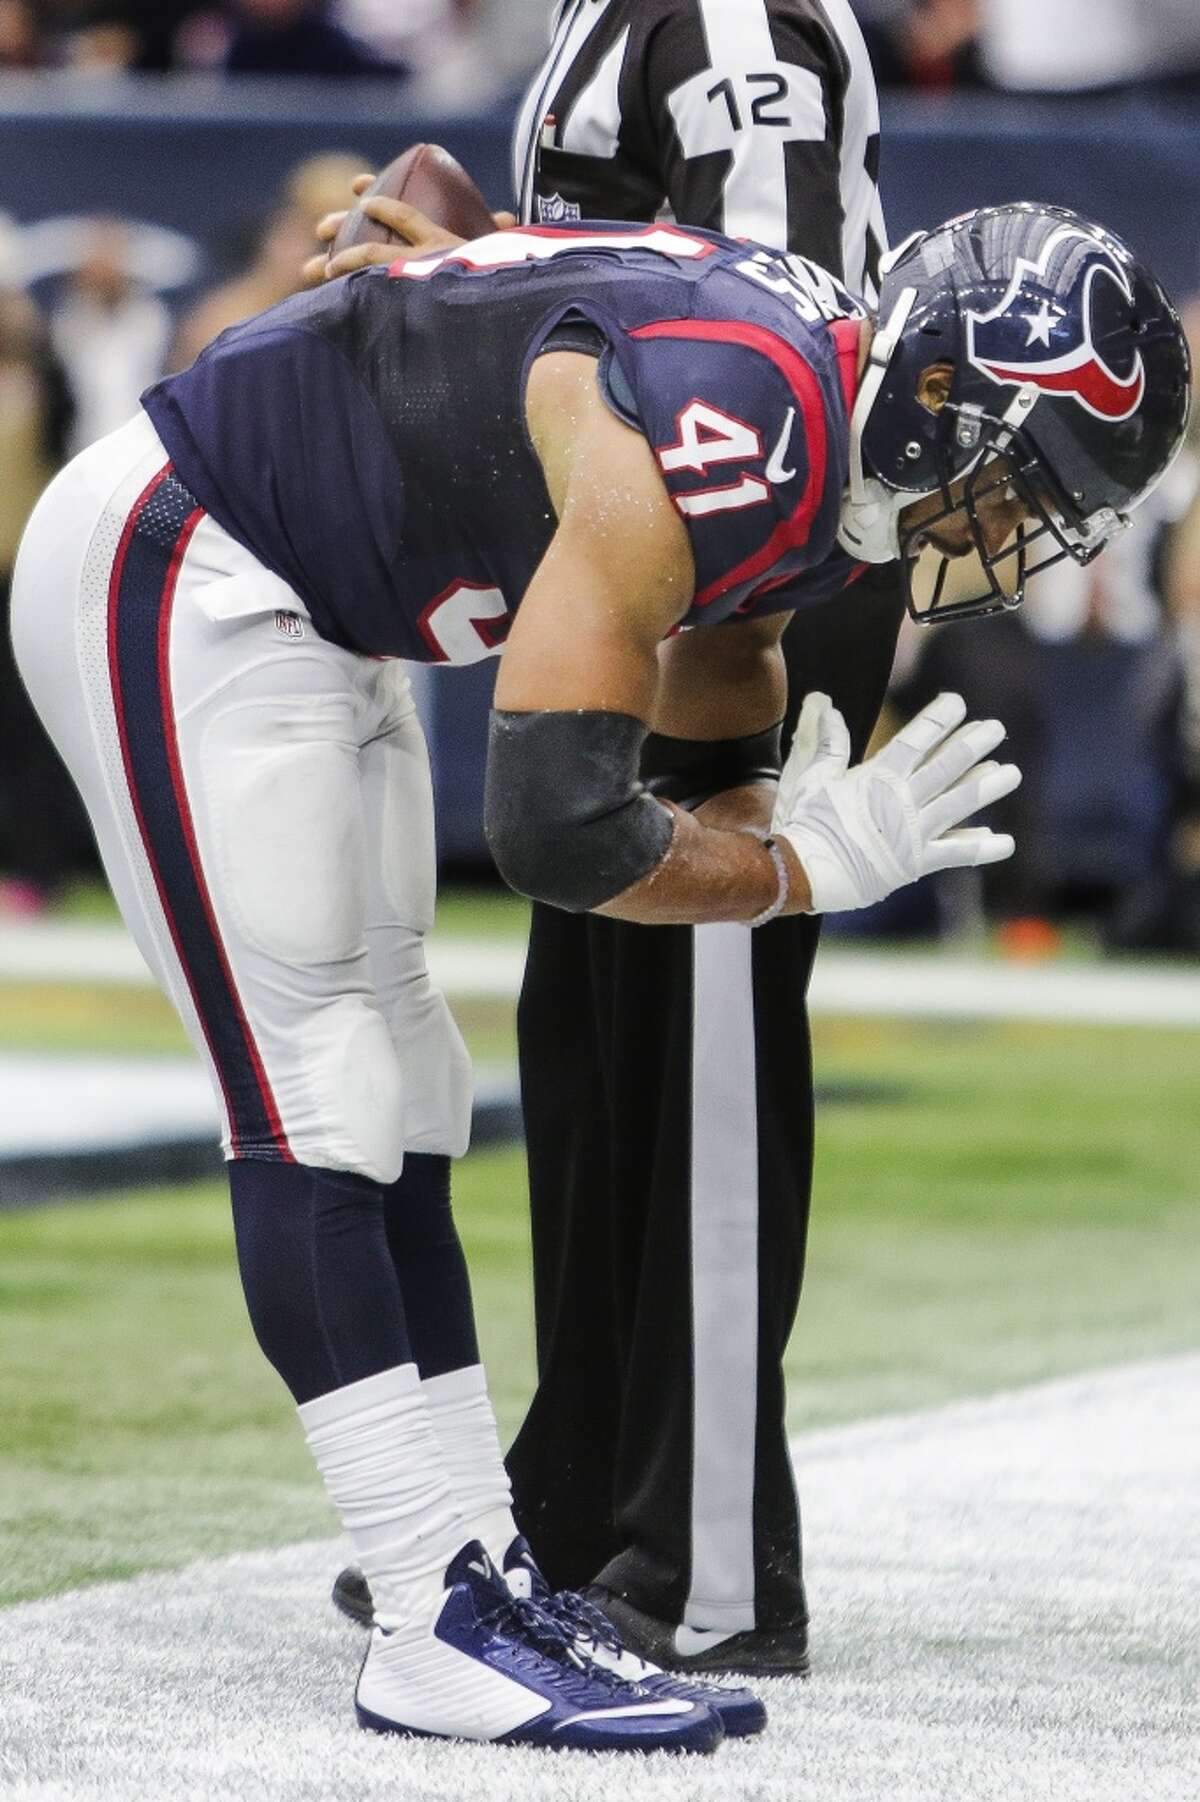 Houston Texans running back Jonathan Grimes (41) celebrates after scoring a touchdown during the first half of an NFL game at NRG Stadium Sunday, Jan. 3, 2016, in Houston. ( Michael Ciaglo / Houston Chronicle )